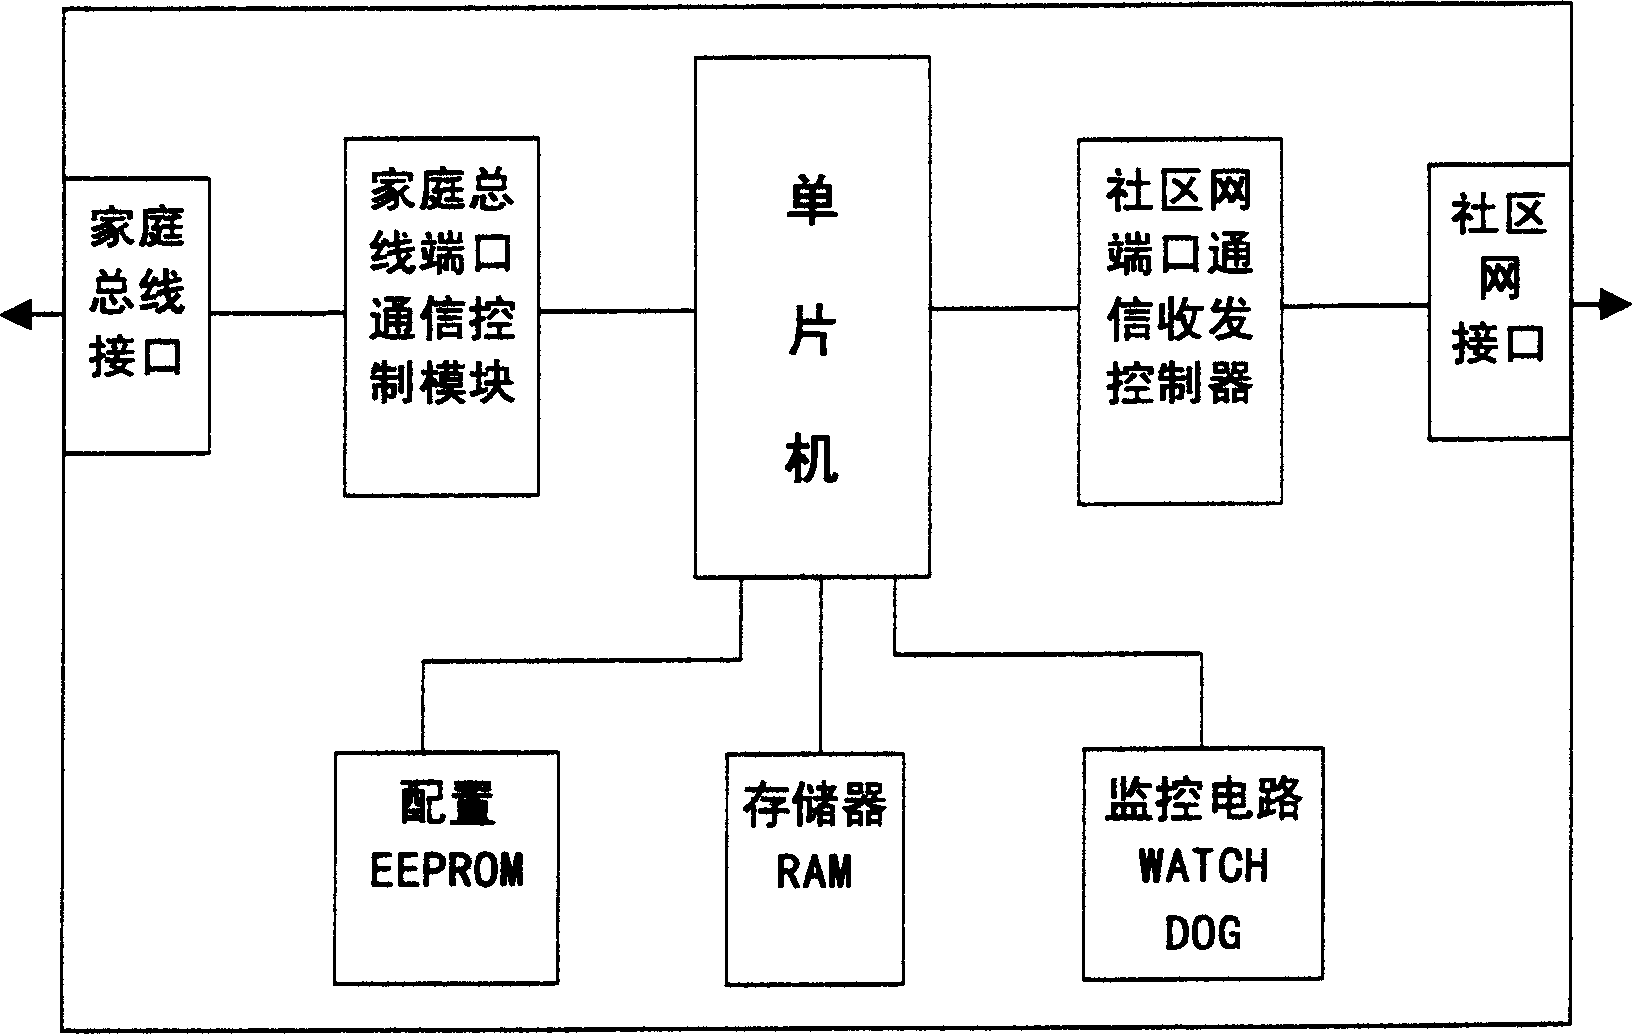 Universal simplified gateway equipment realizing method in intelligent domestic system